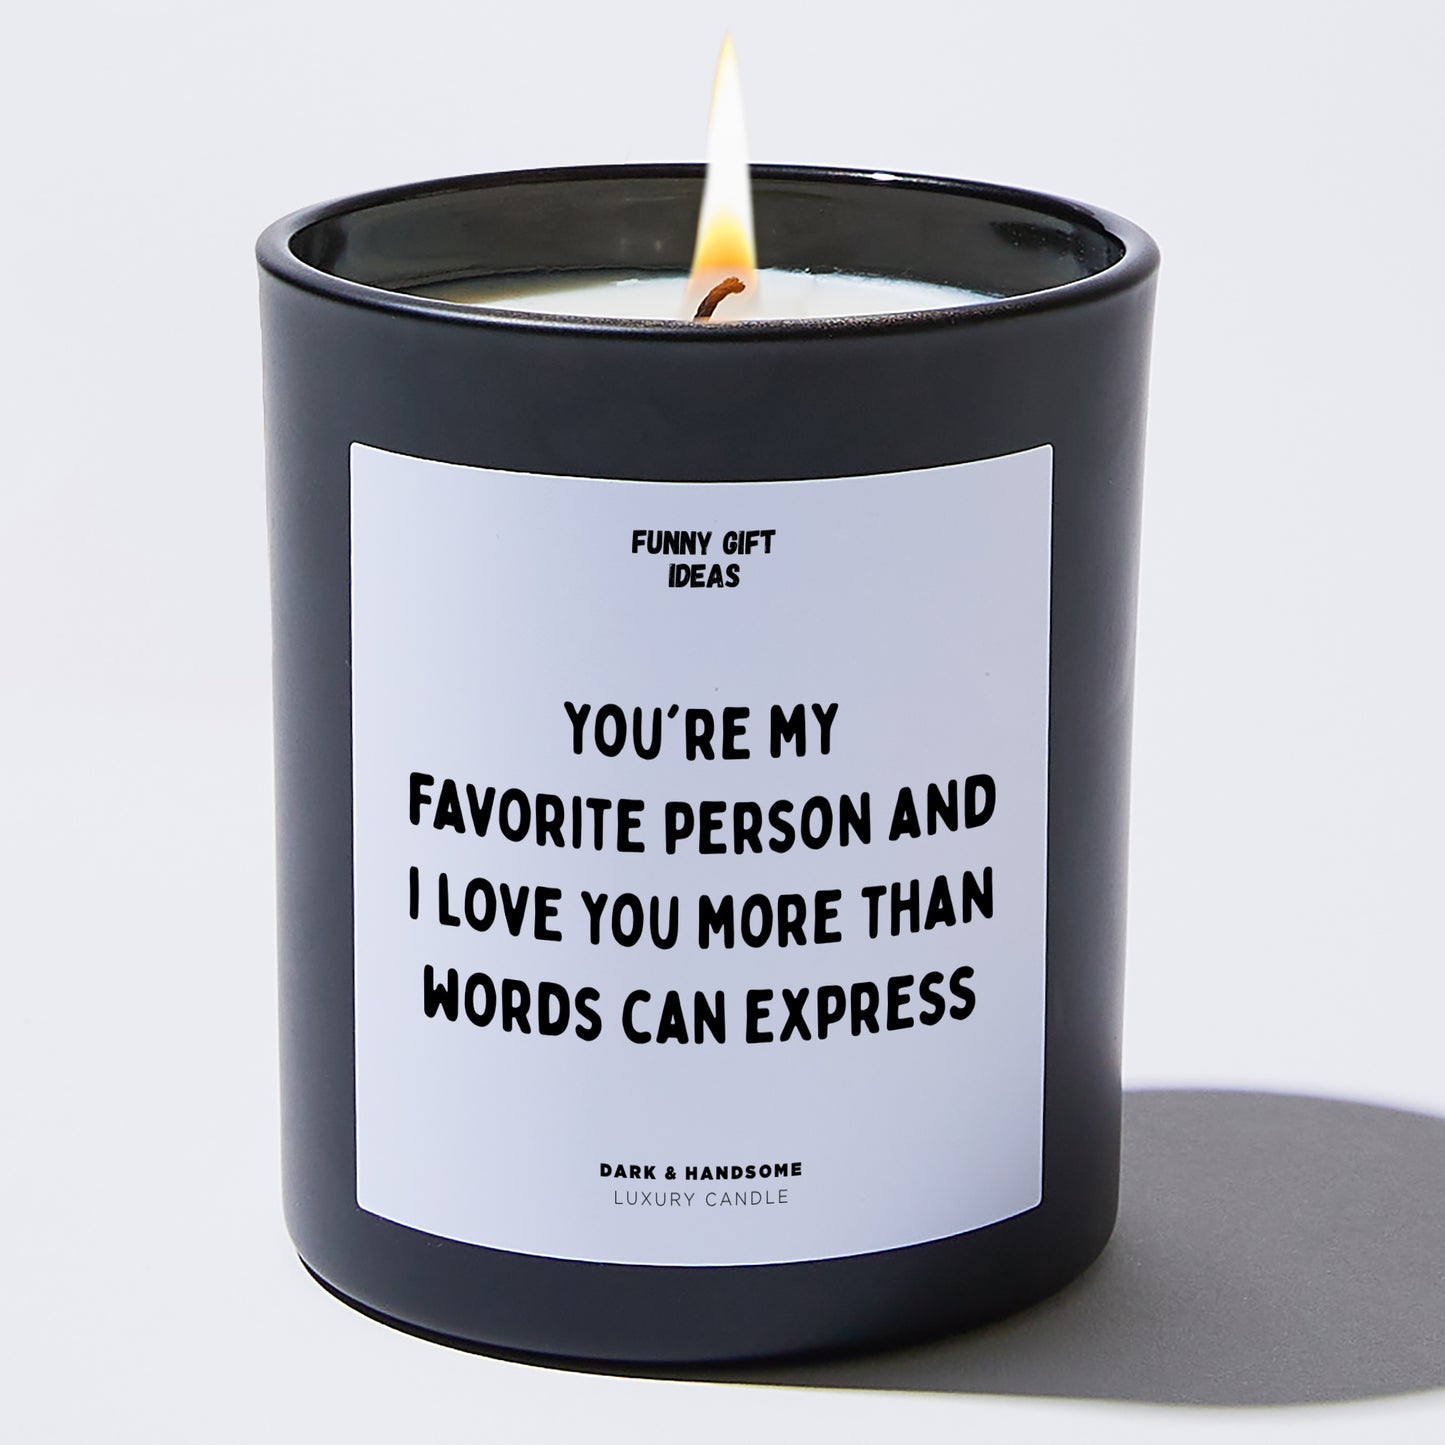 Anniversary Present - You're My Favorite Person, and I Love You More Than Words Can Express. - Candle